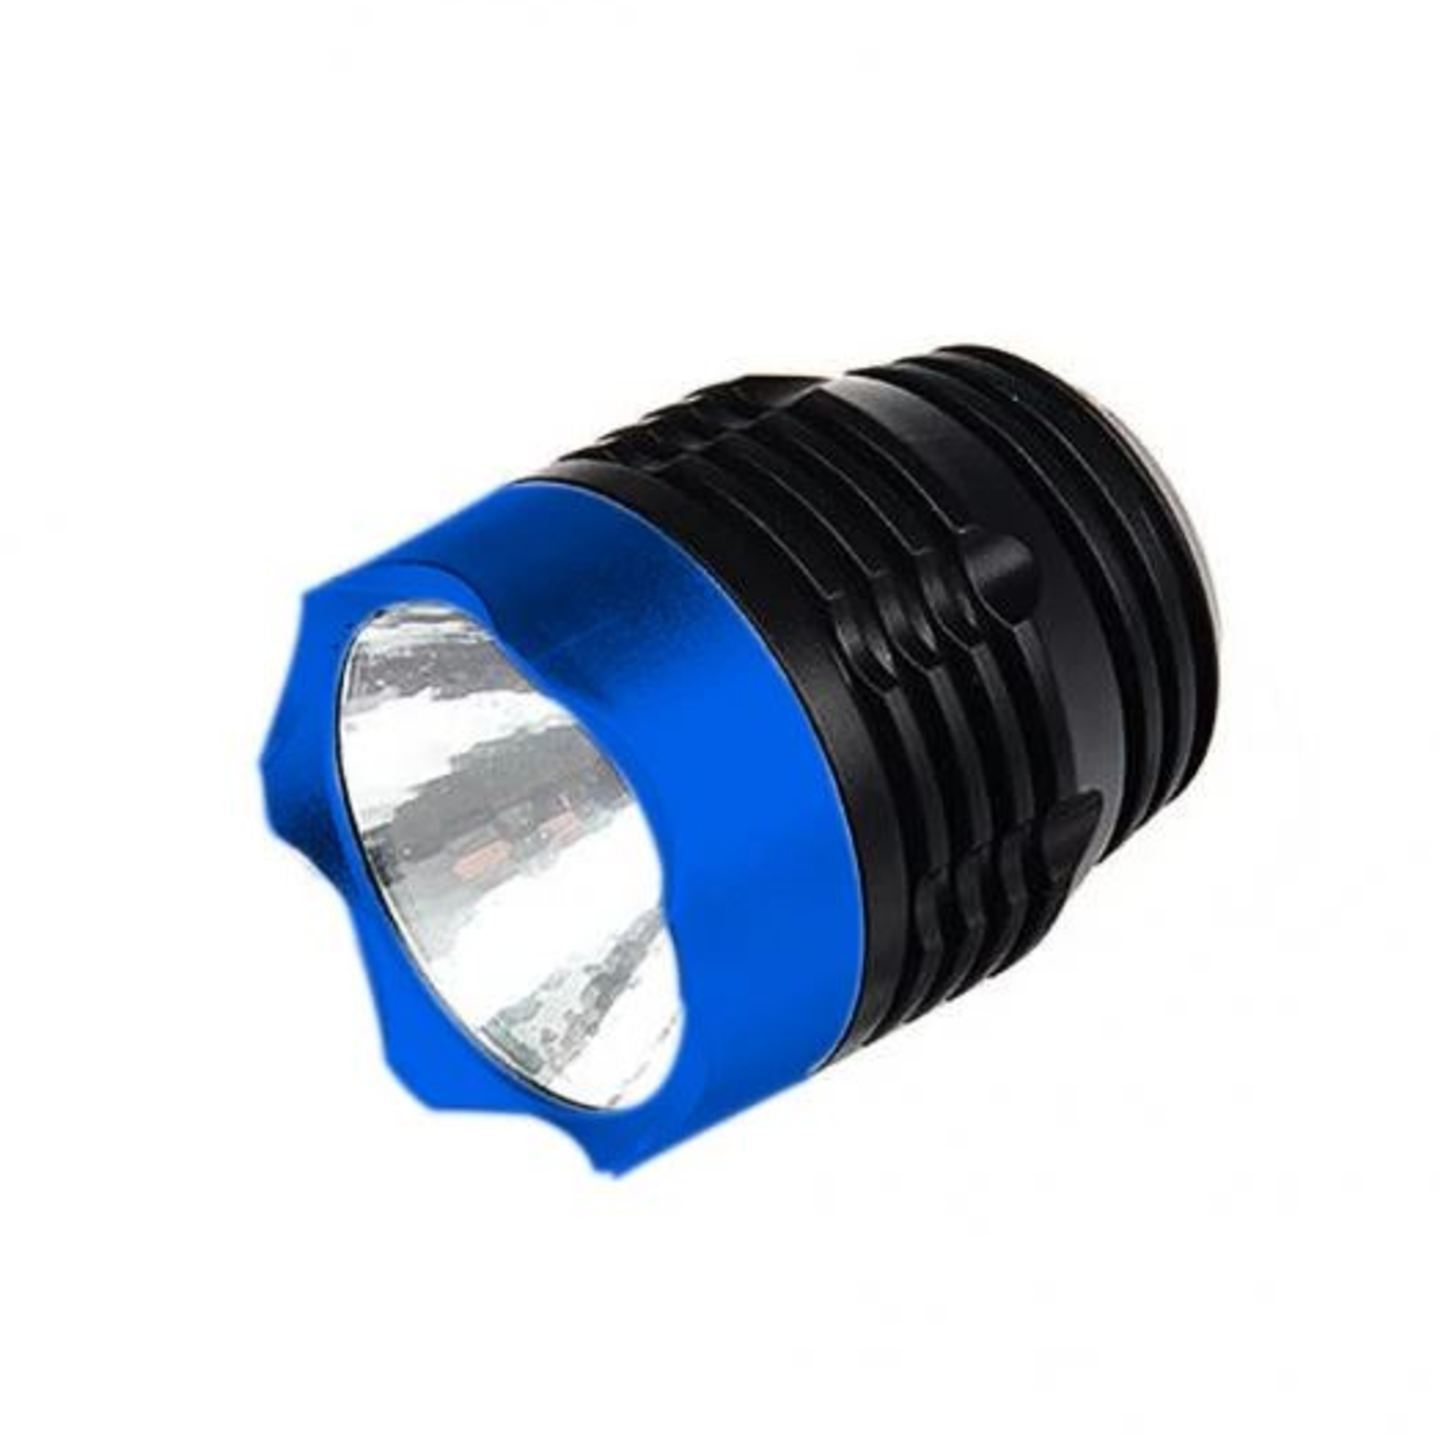 Bicycle Front Light Zoomable LED Warning Lamp Torch Headlight Safety Bike Light